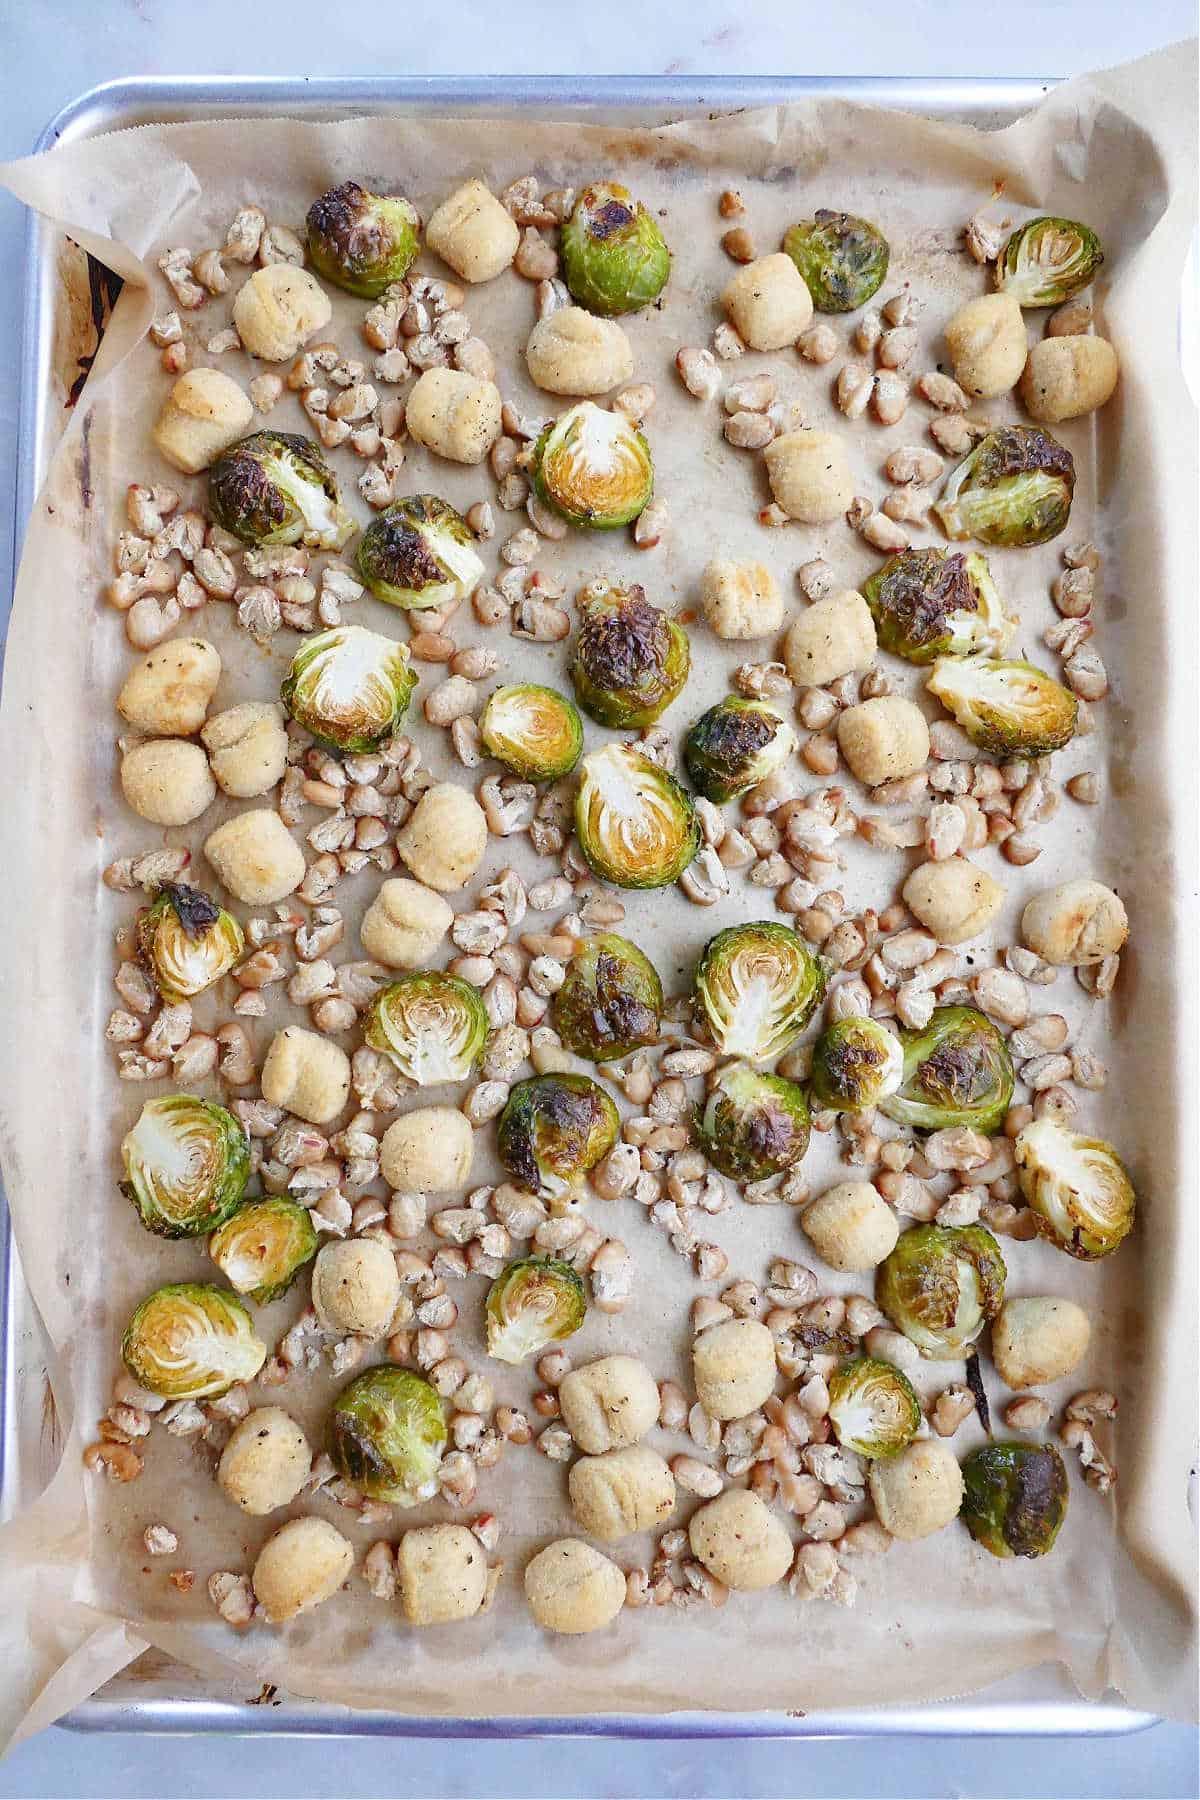 roasted Brussels sprouts, gnocchi, and white beans spread out on a lined sheet pan